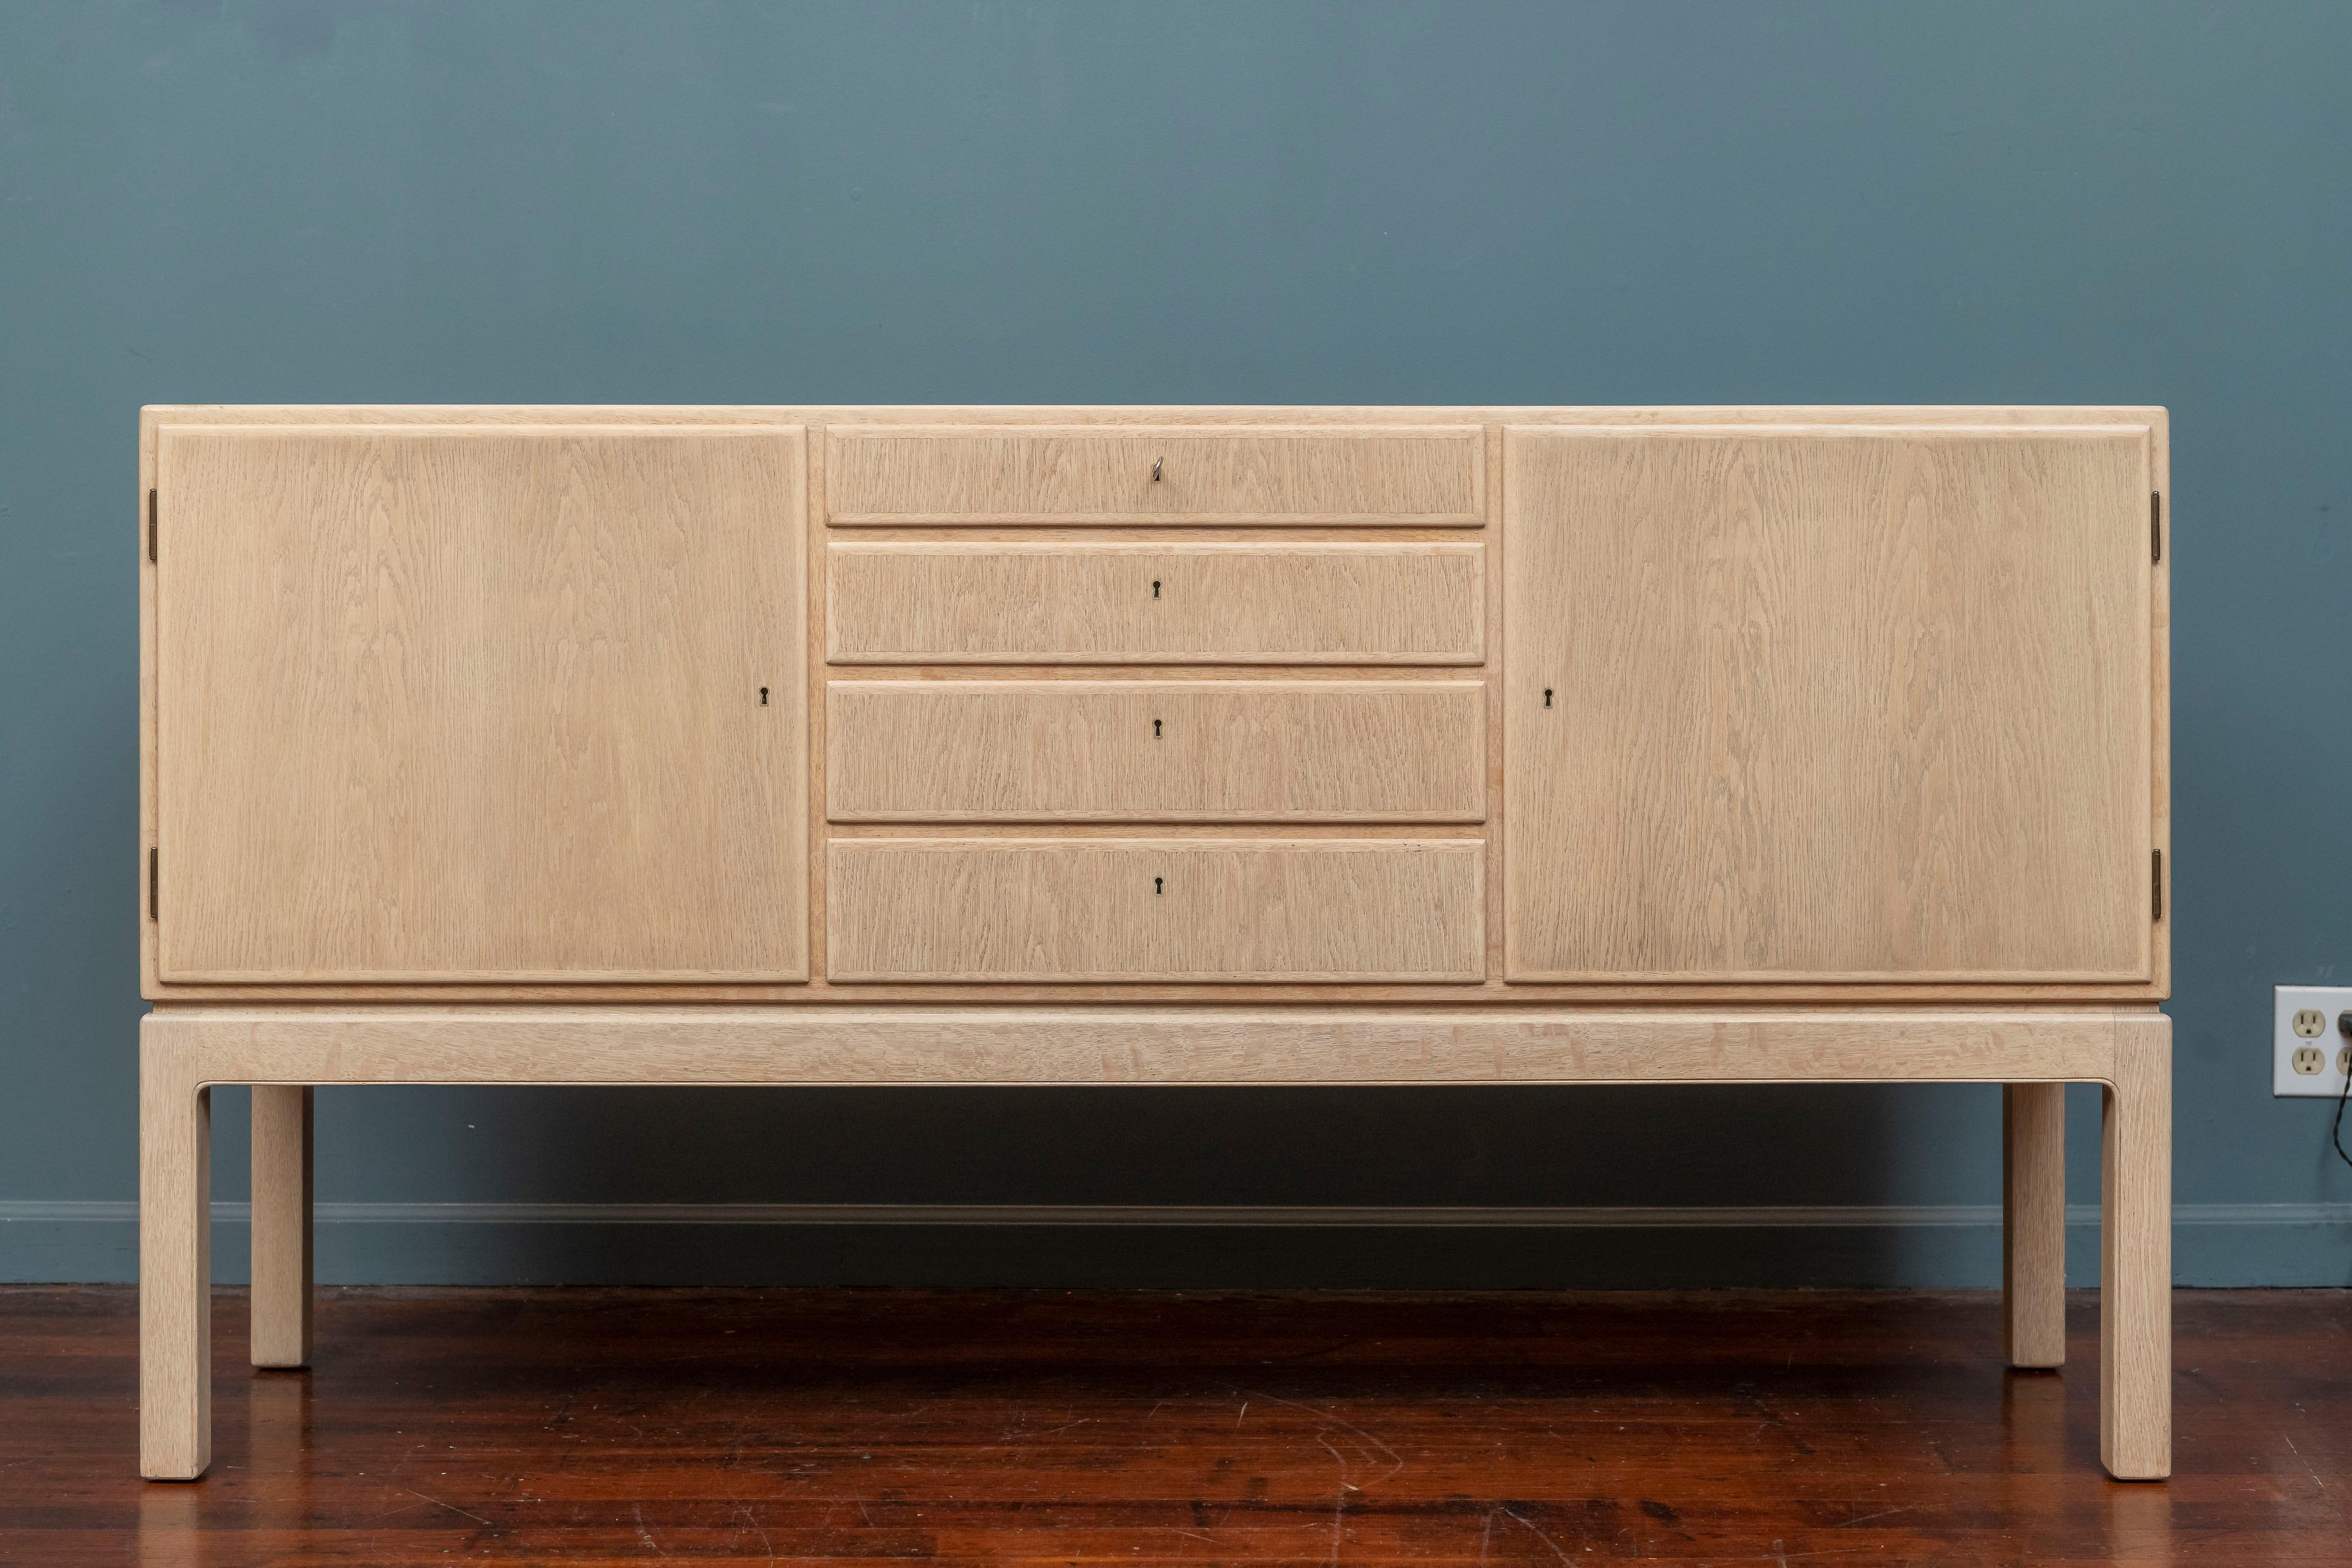 Scandinavian Modern credenza by Thorald Madsens for Snedkeri, Denmark. High quality construction and materials by a well regarded cabinetmaker from the 1930-40s. Made from teak and oak newly refinished in a white wash or pickled finish. Simple yet